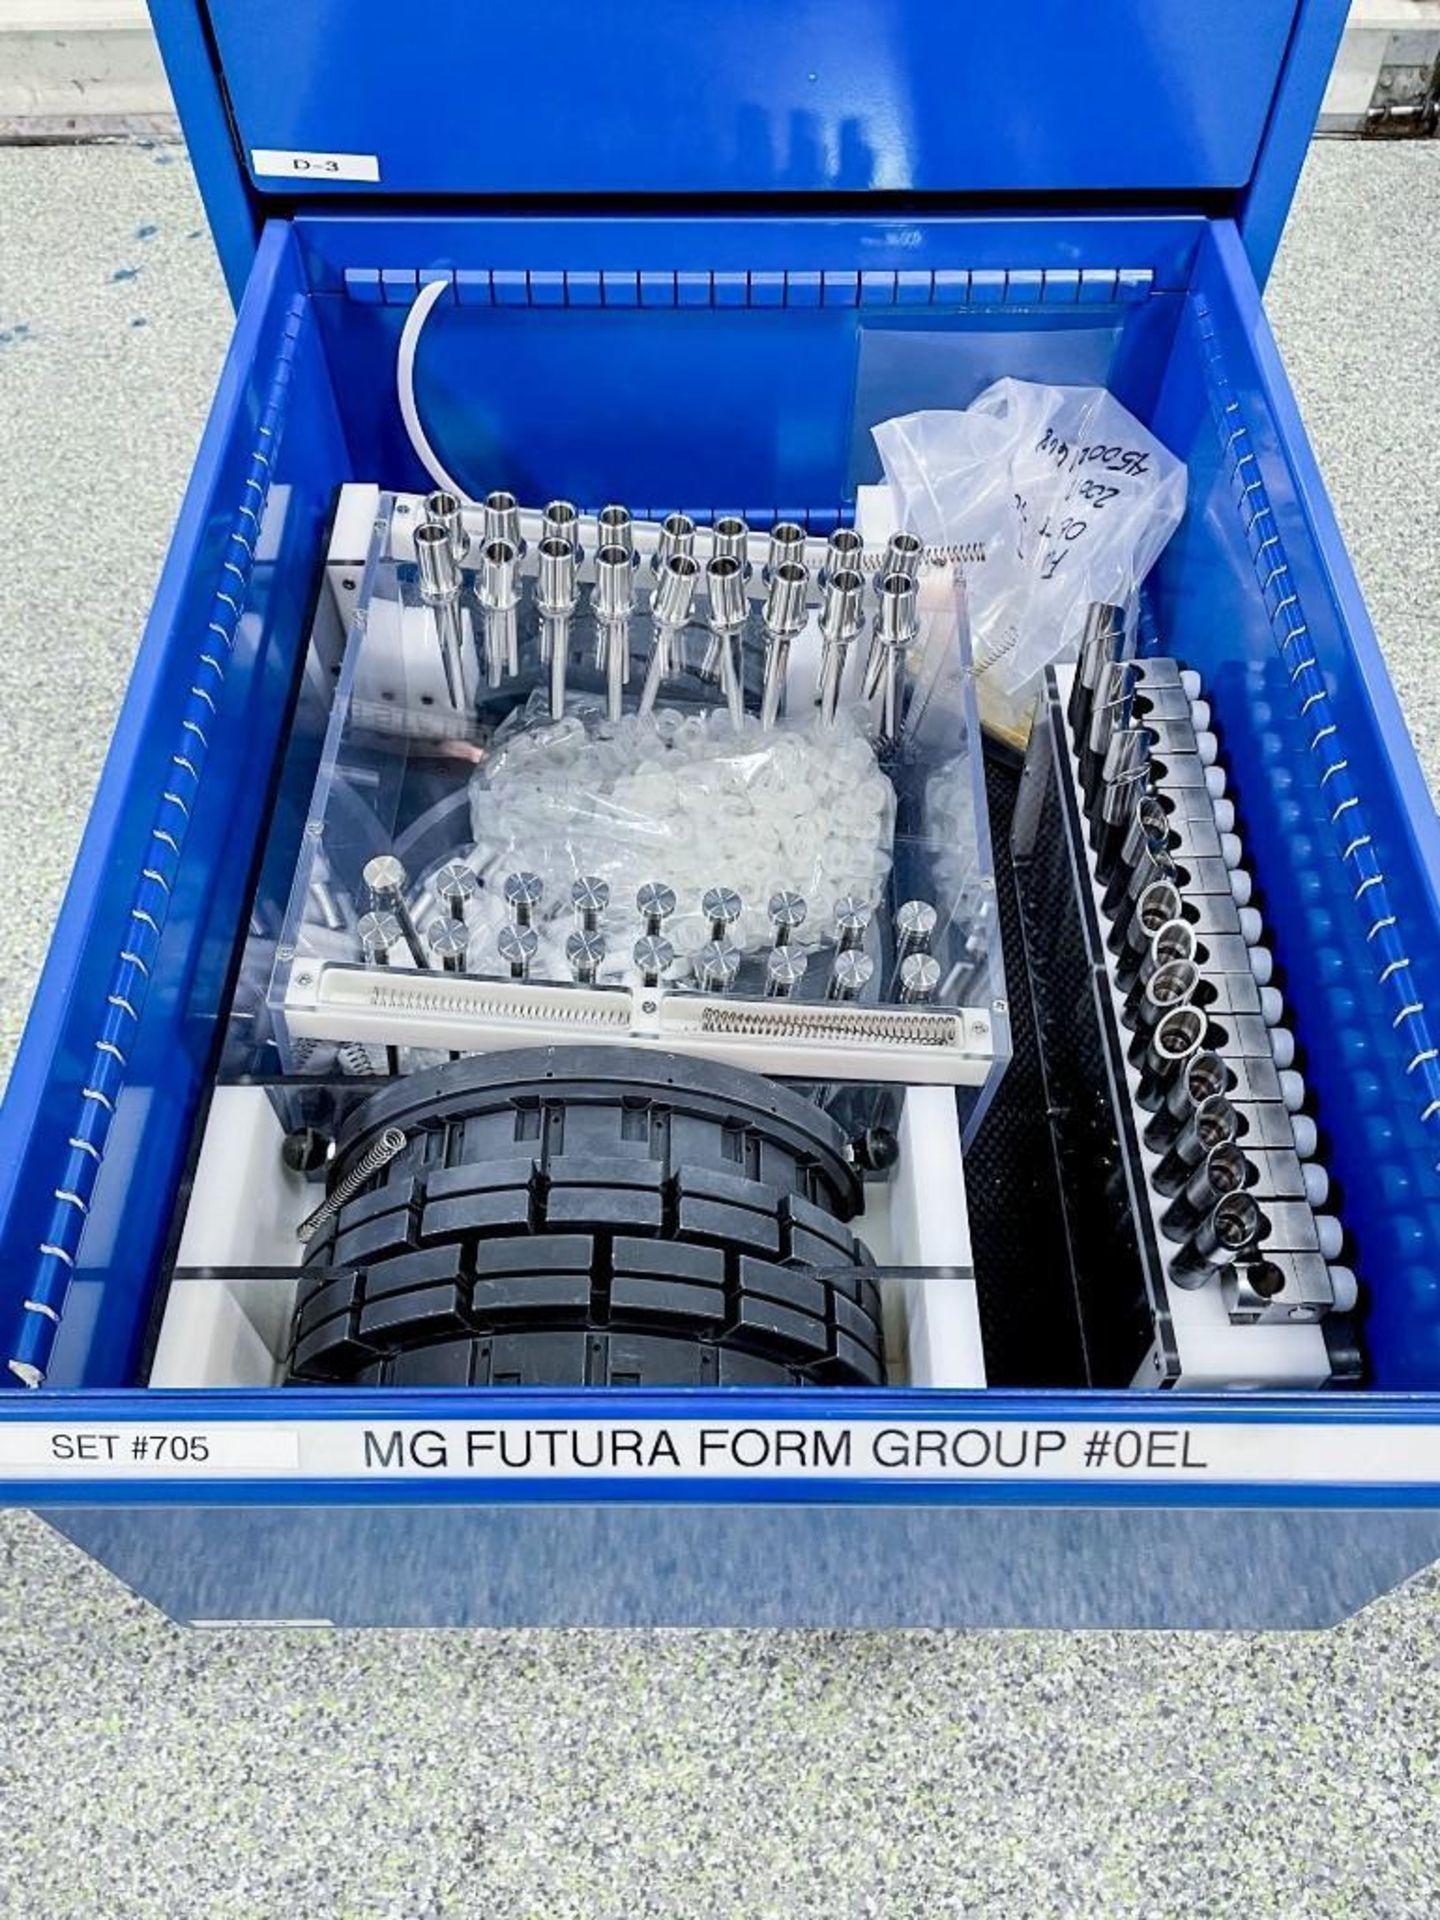 MG2 Capsule Filler Type Futura with Multiple Sets of tooling - Image 29 of 41